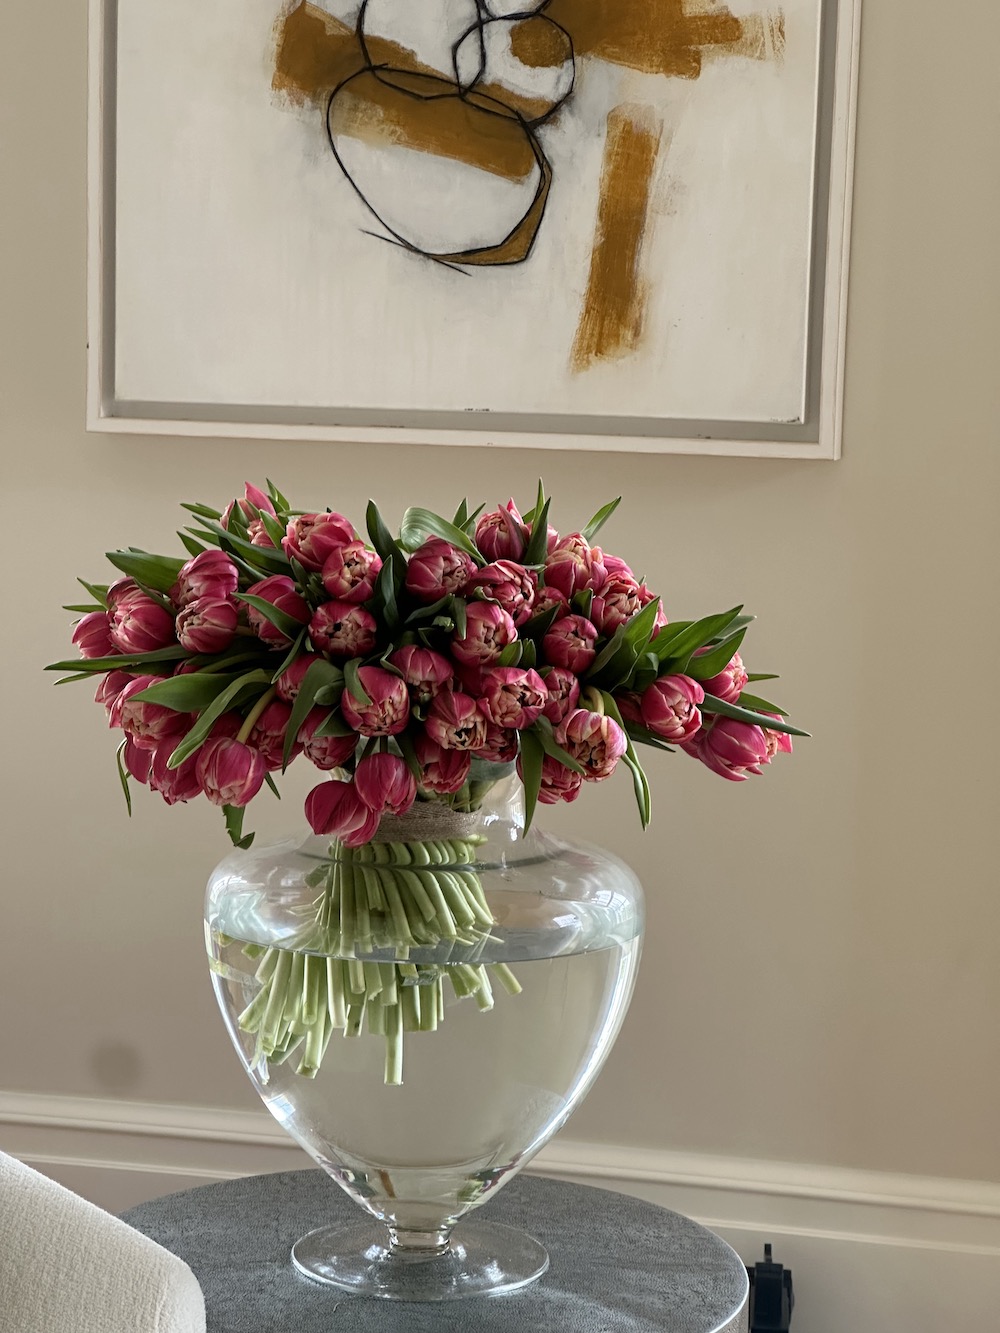 Floral installation at Sibford Park of hot pink tulips In hurricane glass vase